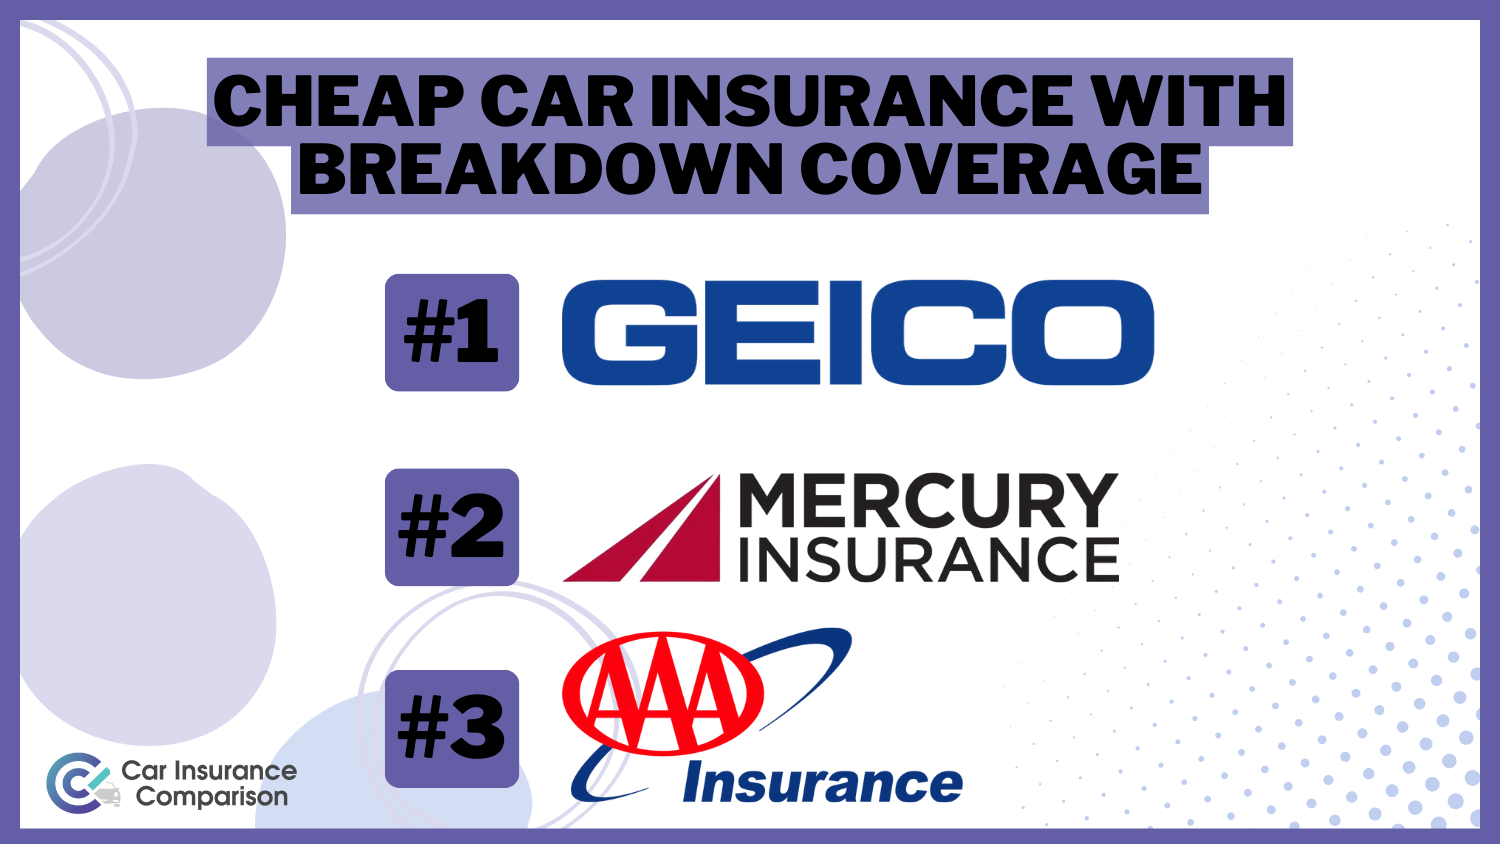 Cheap Car Insurance With Breakdown Coverage - Geico, Mercury, AAA